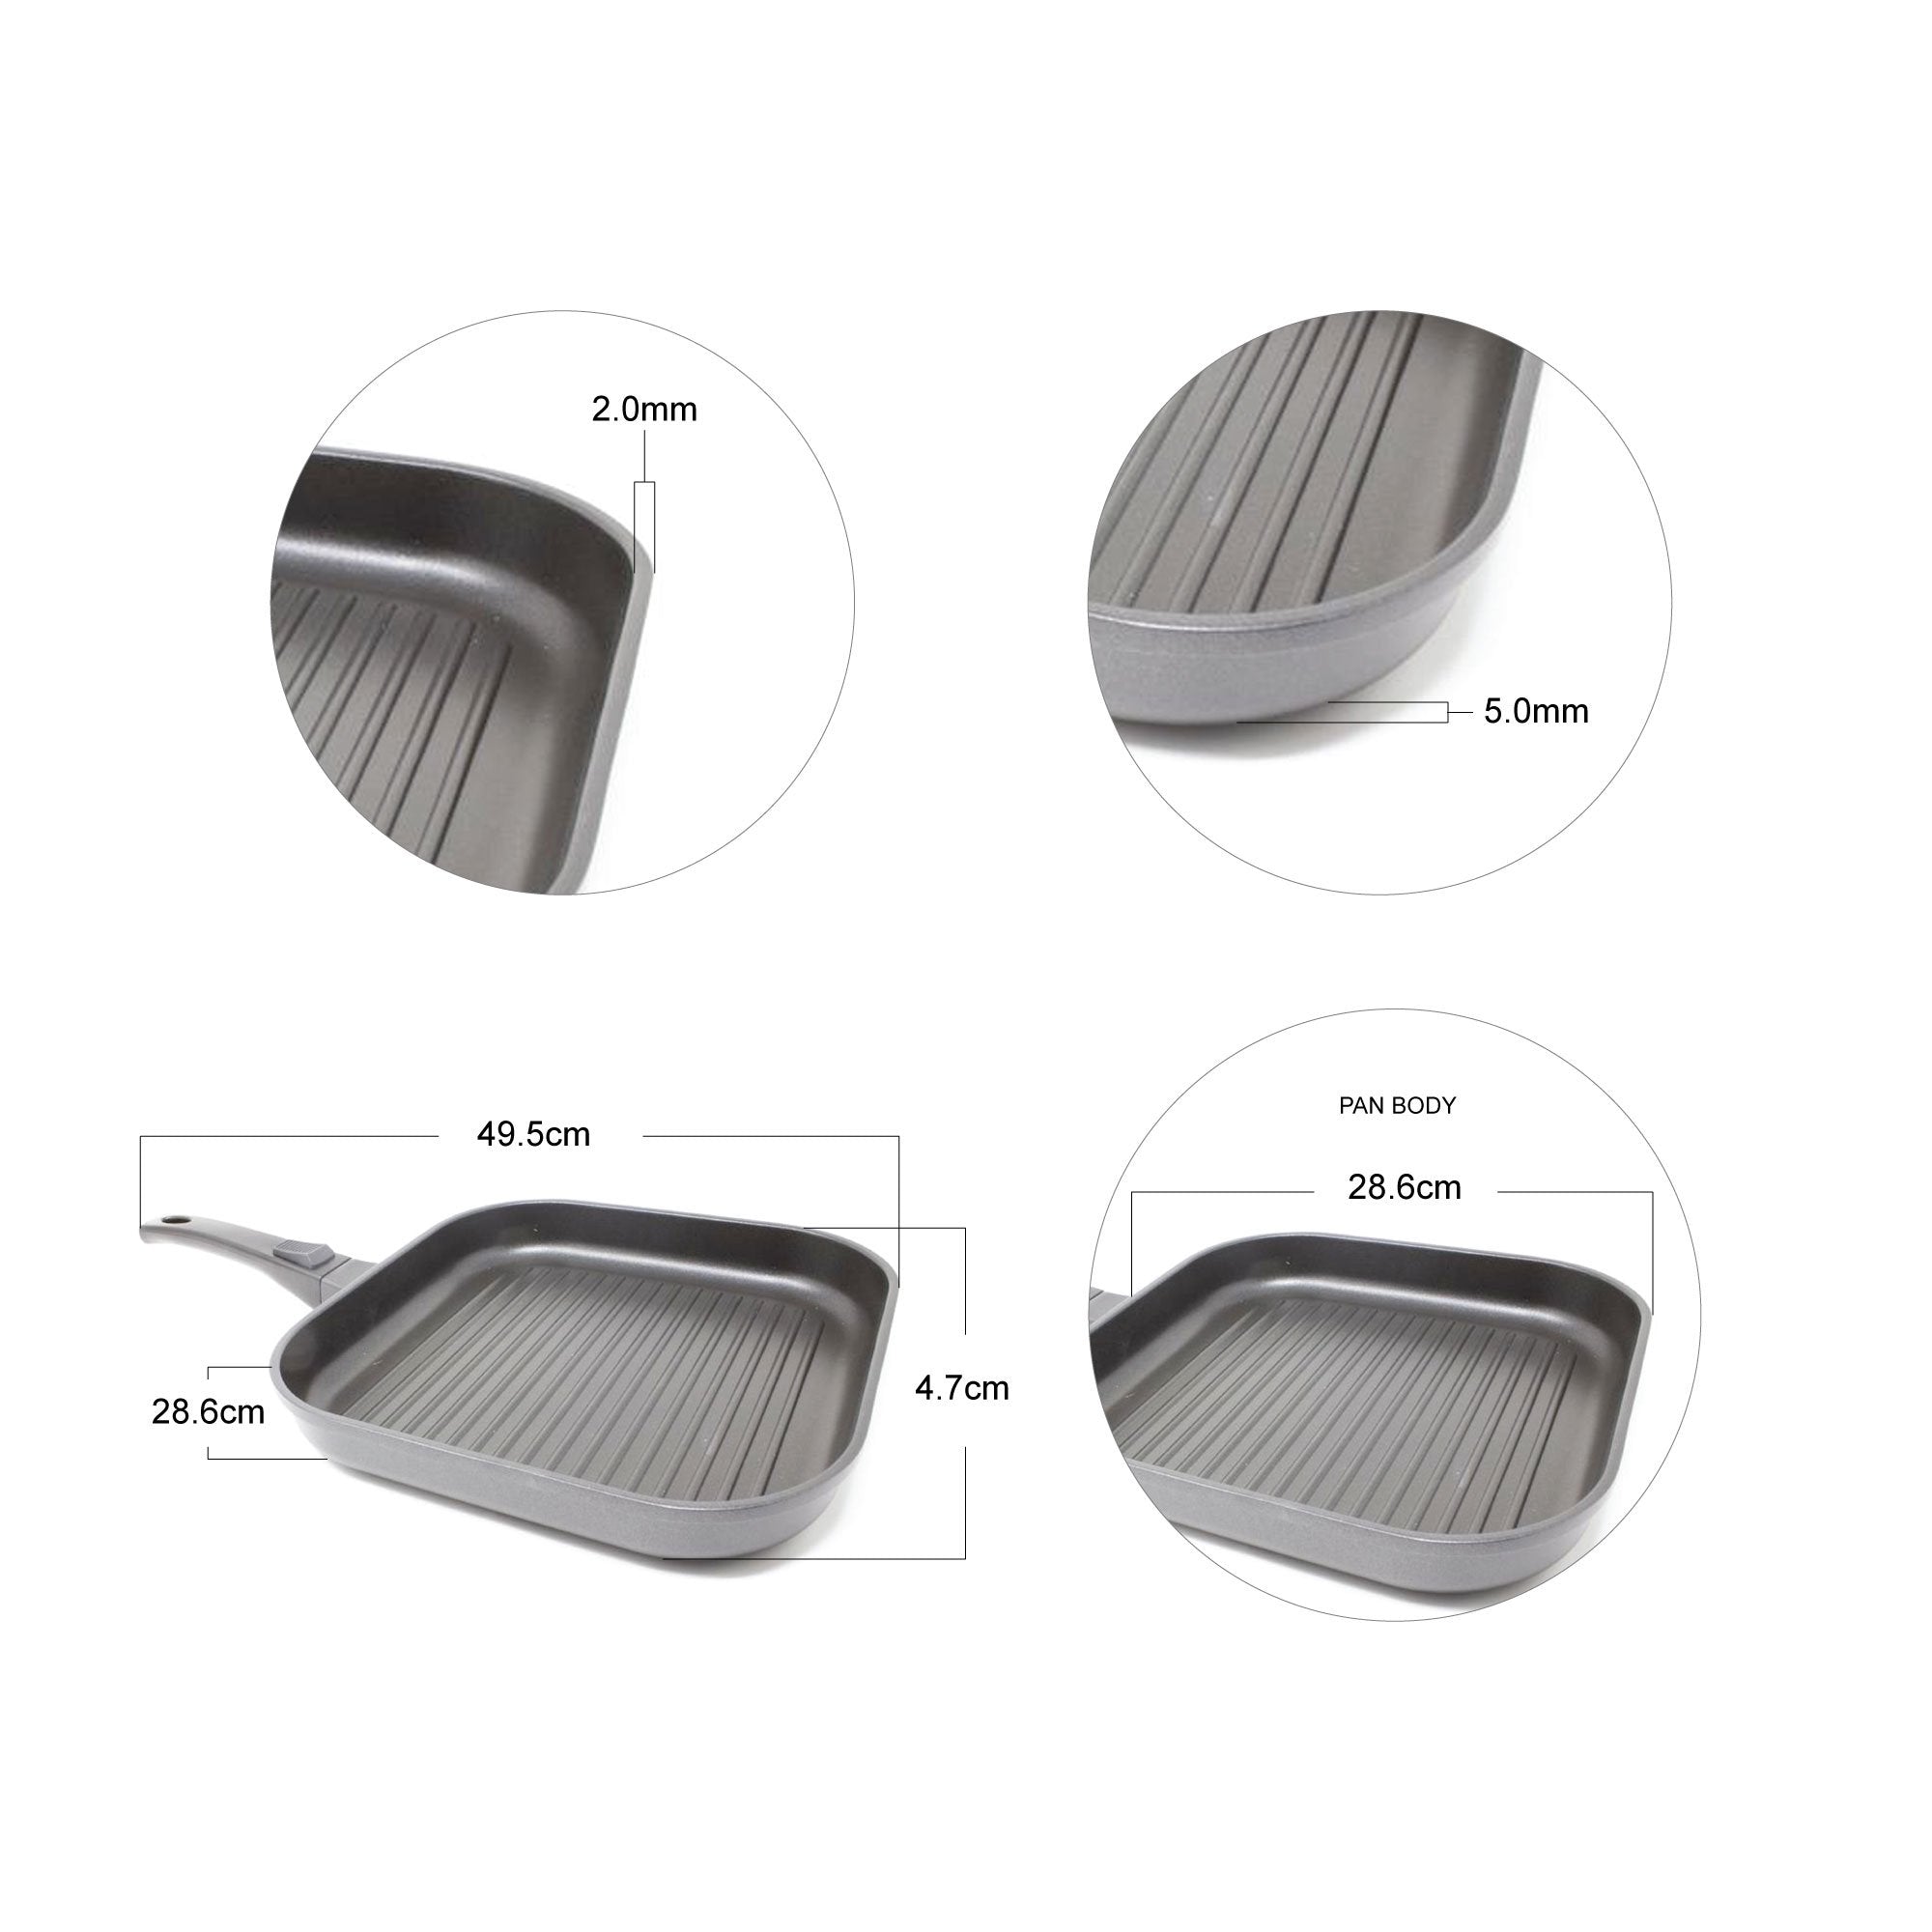 NEOFLAM 2021 SS Cookware & Bakeware